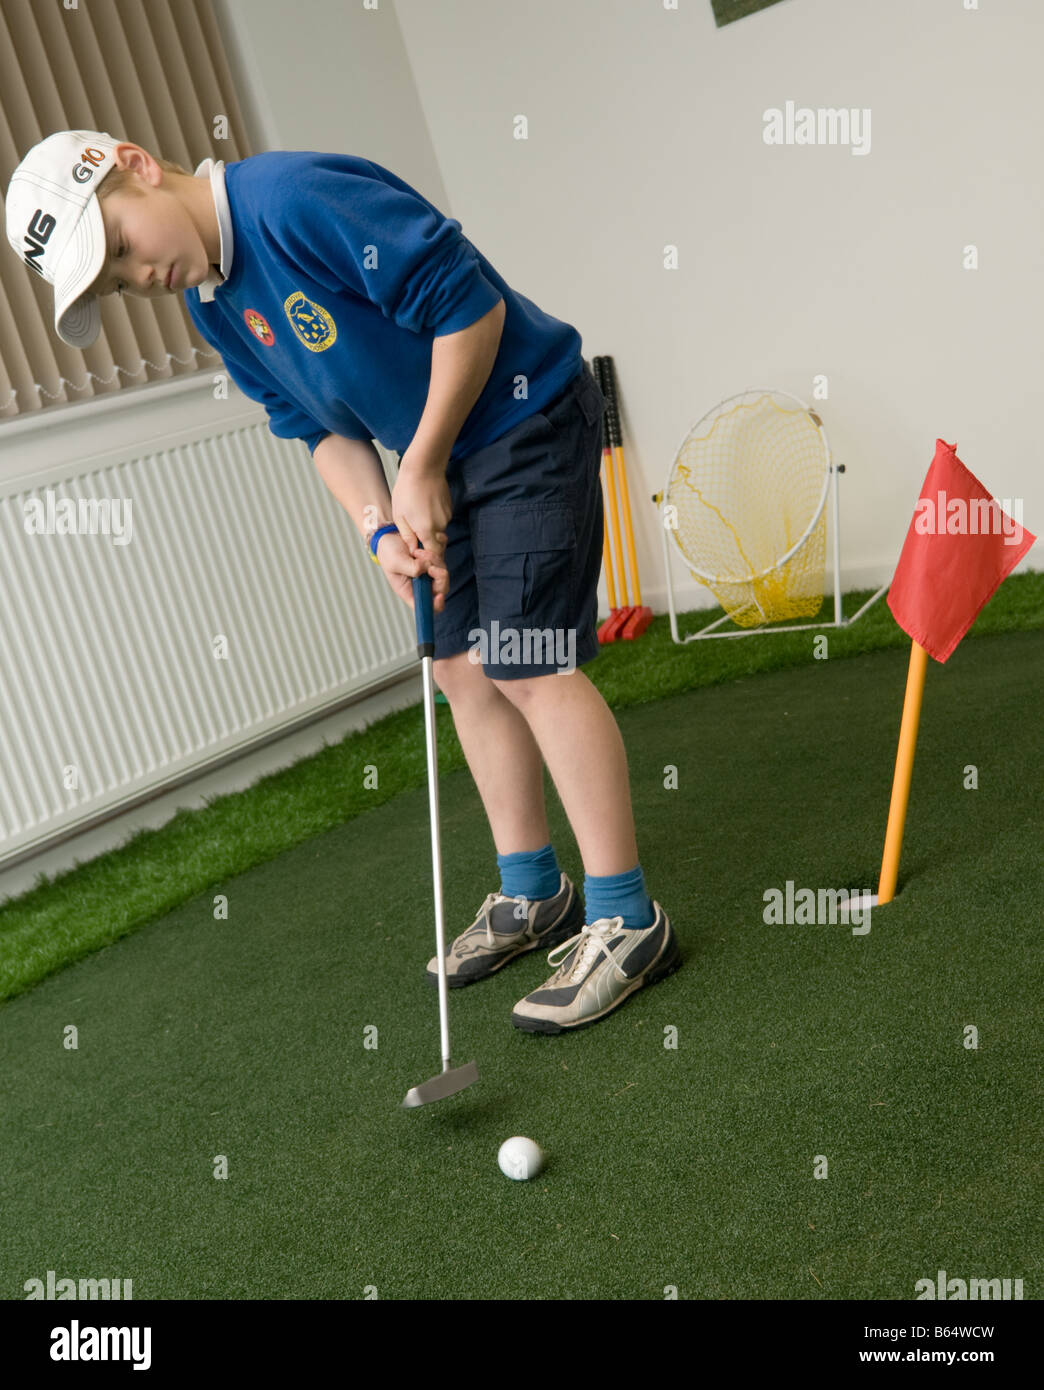 A young boy playing putting golf indoors at Aberdyfi golf club wales UK, practising his stroke on artificial grass Stock Photo